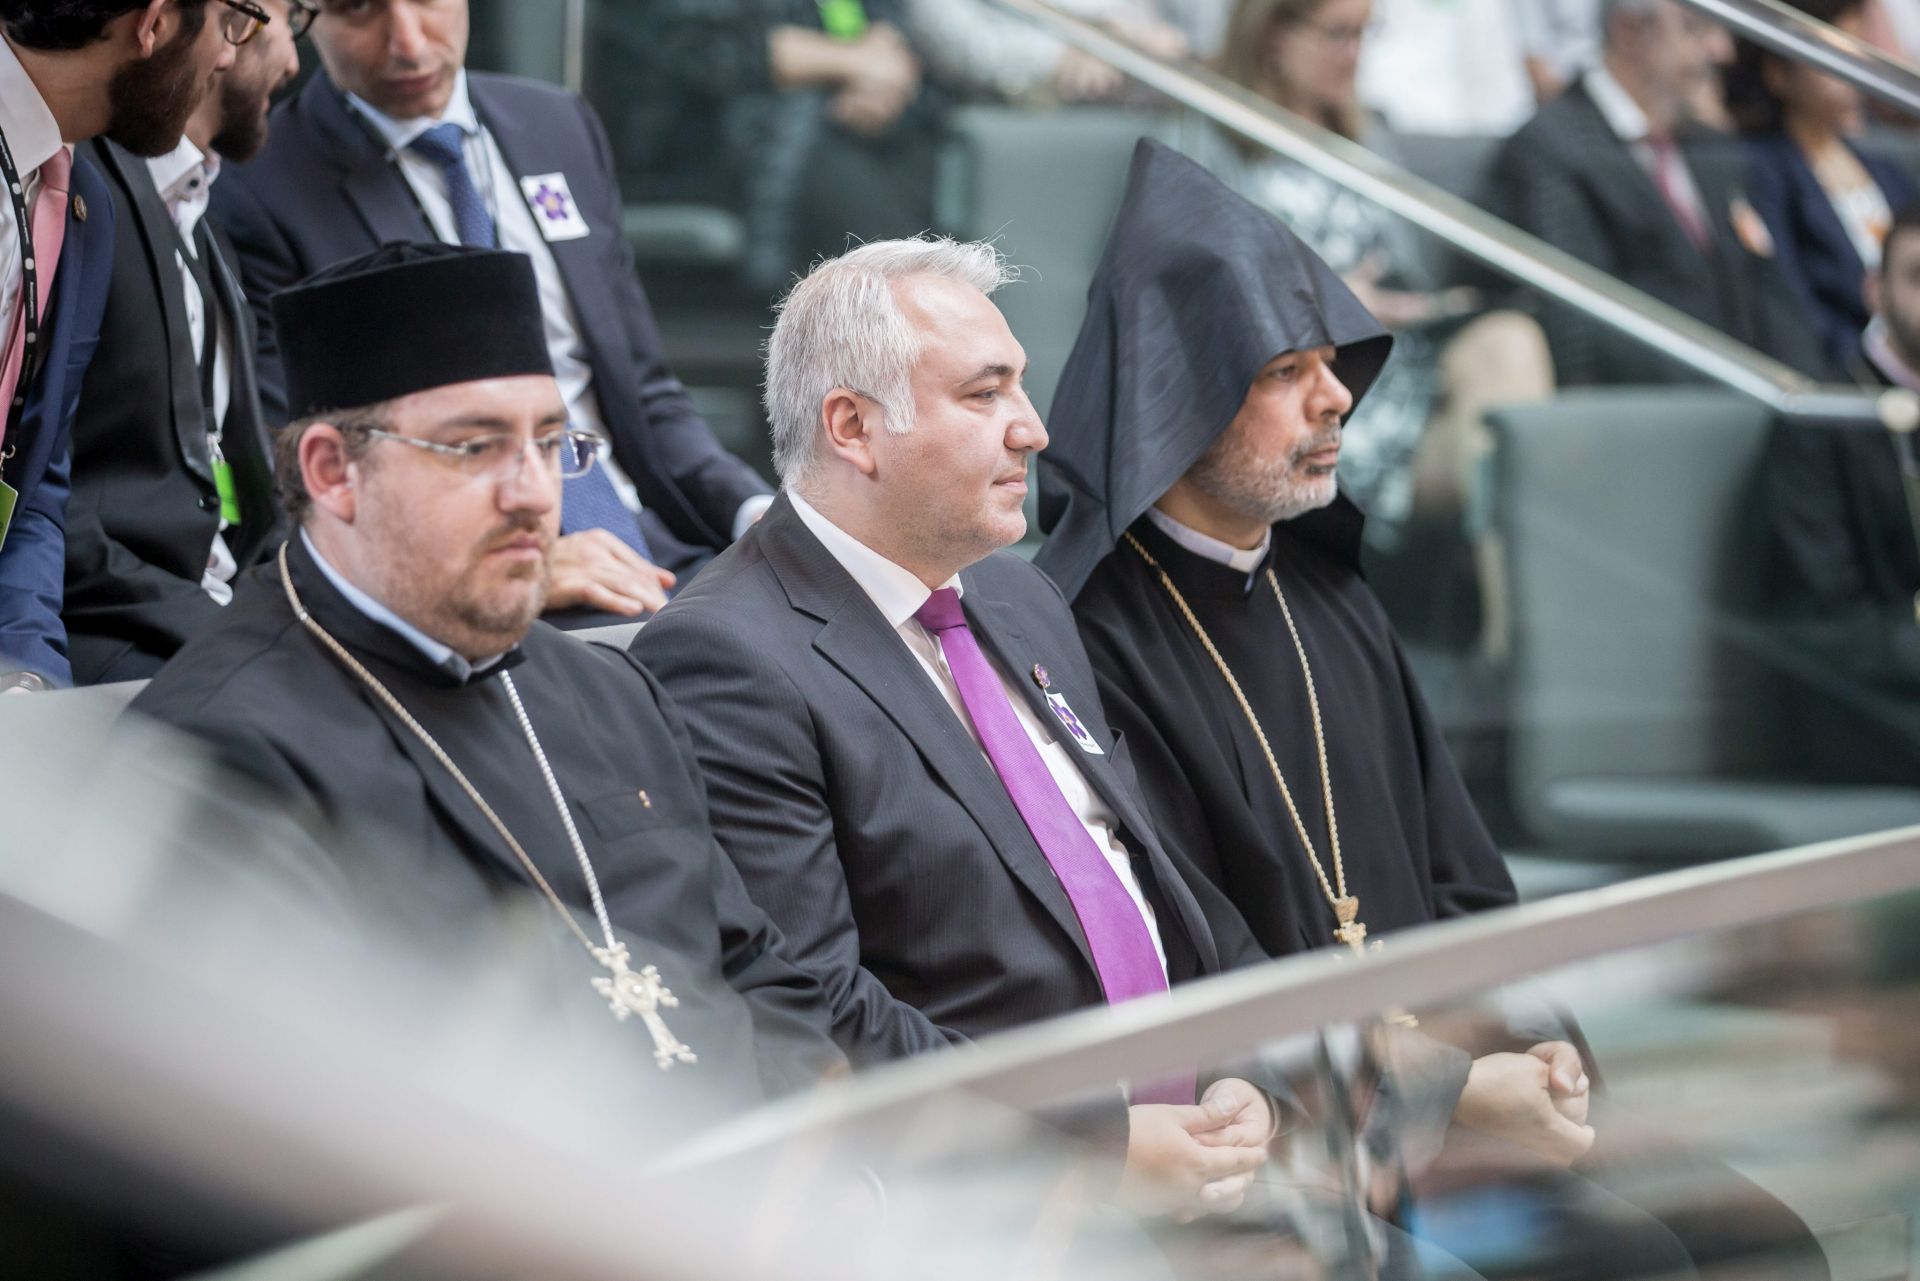 epa05341618 (R-L) Serovpe Isakhanyan, episcopal vicar of the Armenian church in Germany, Ilias Kevork Uyar of 'Acknowledgement Now' group, and pastor Diradur Sardaryan attend a session of the German Parliament in Berlin, Germany, 02 June 2016. The session focusses on the regulation of prostitution and the acknowledgement of the Armenian genocide of 1915-16.  EPA/MICHAEL KAPPELER